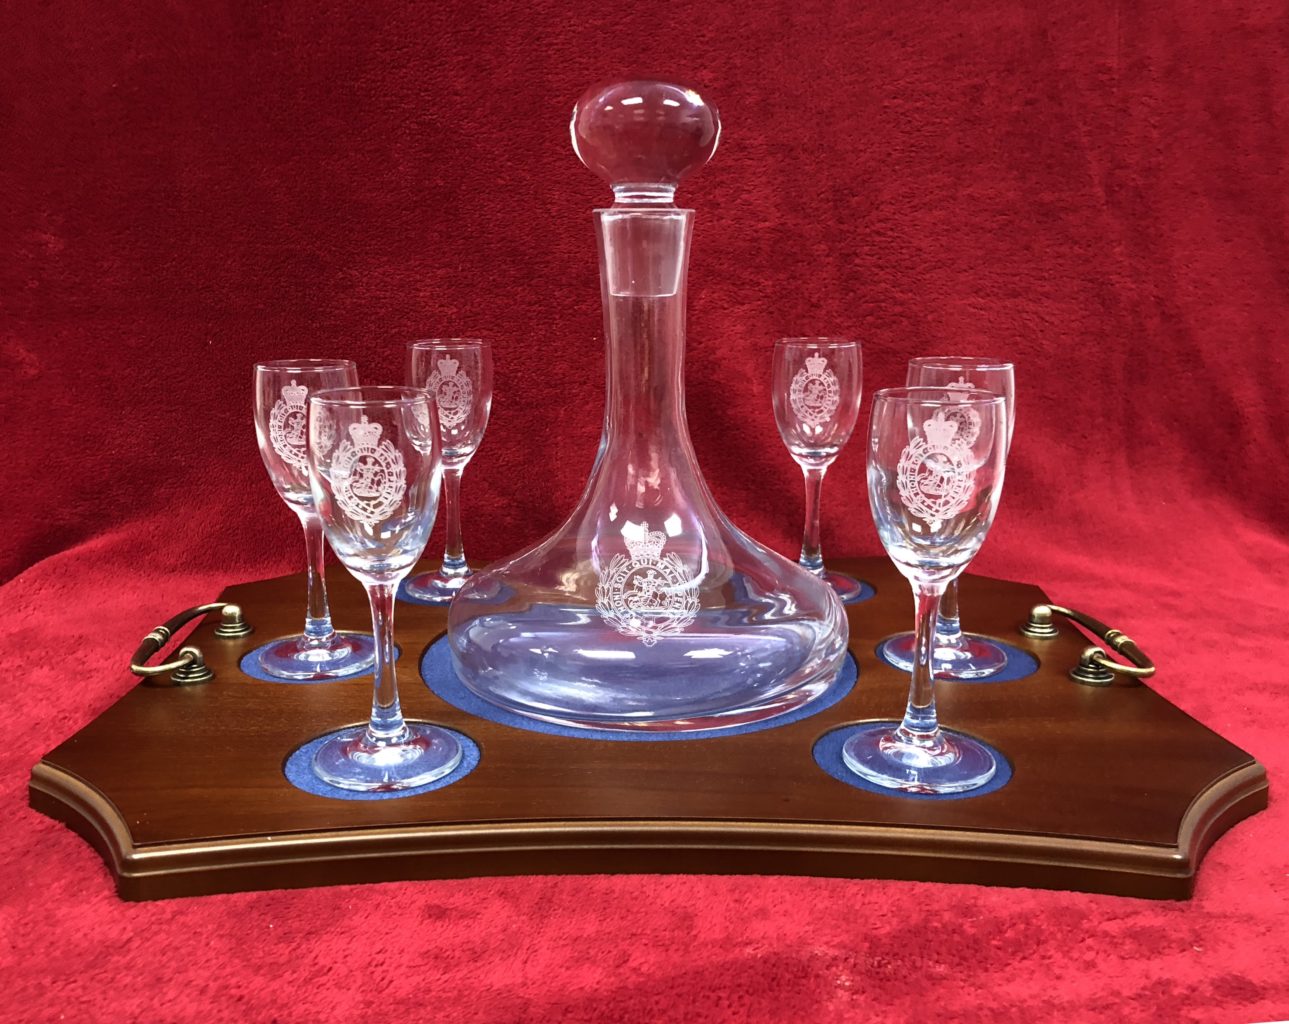 Ships Port Decanter Set With 6 Glasses And Tray Pronto Images 2004